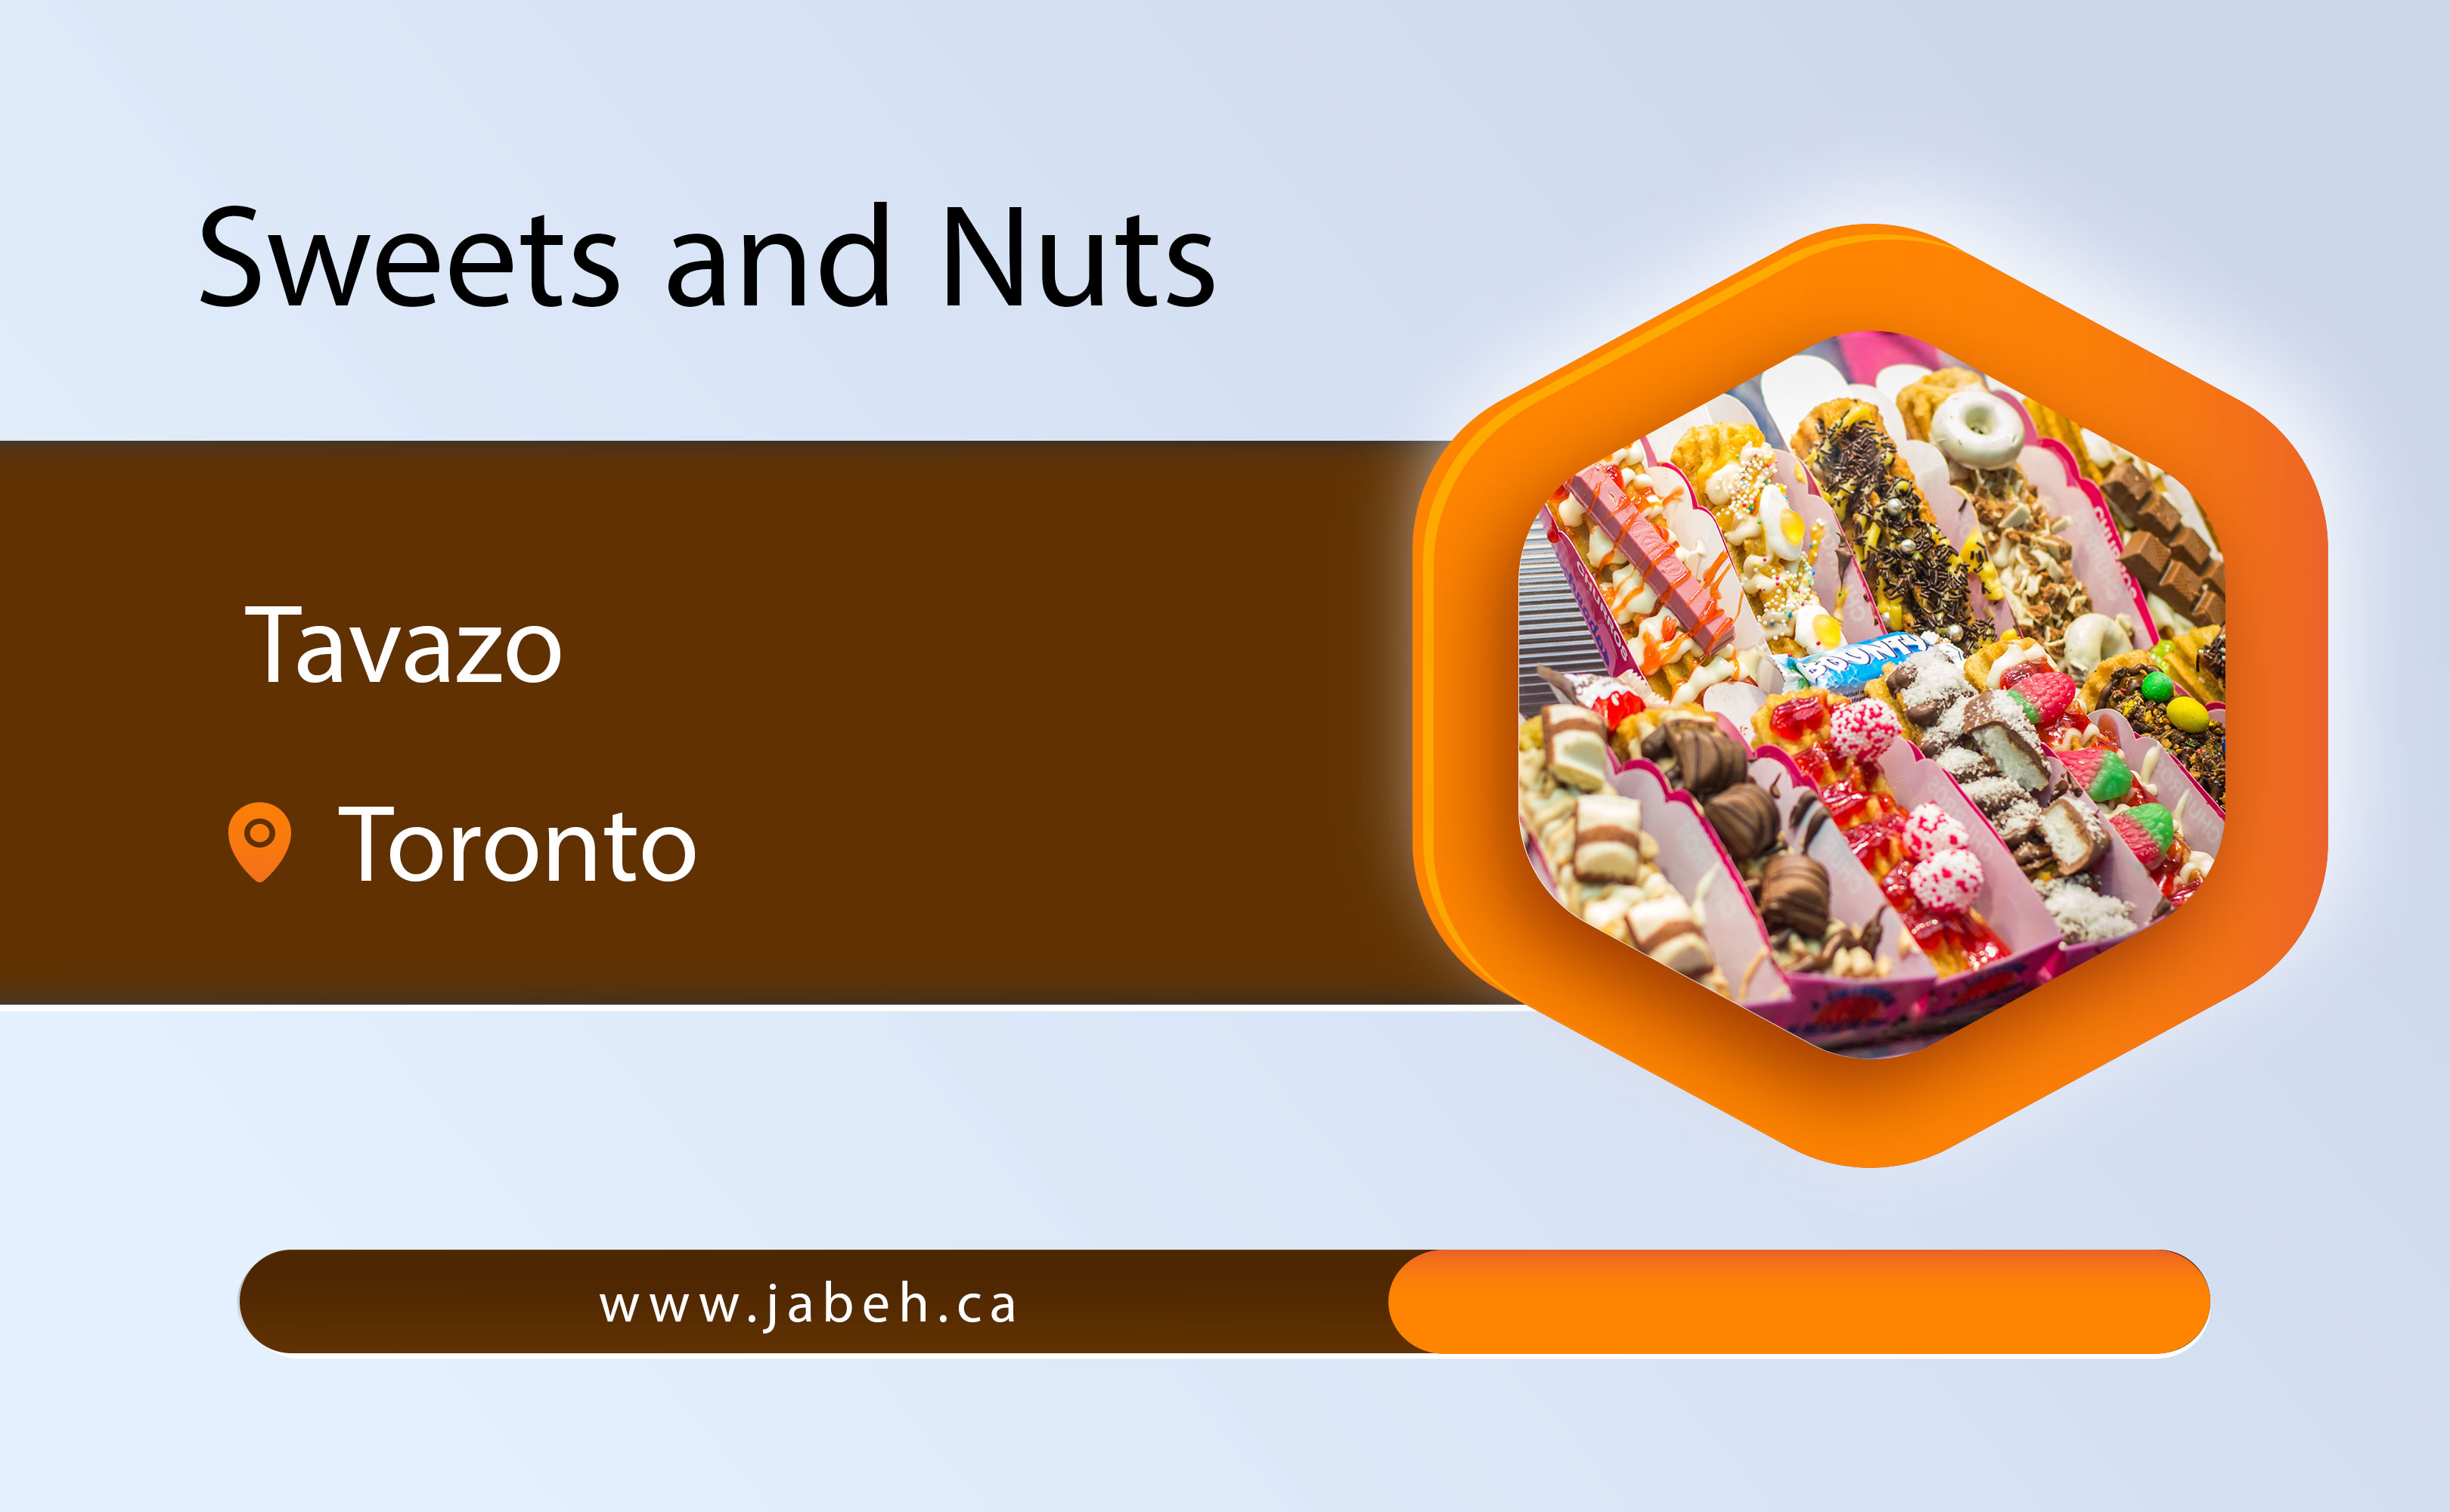 Humble sweets and nuts in Toronto